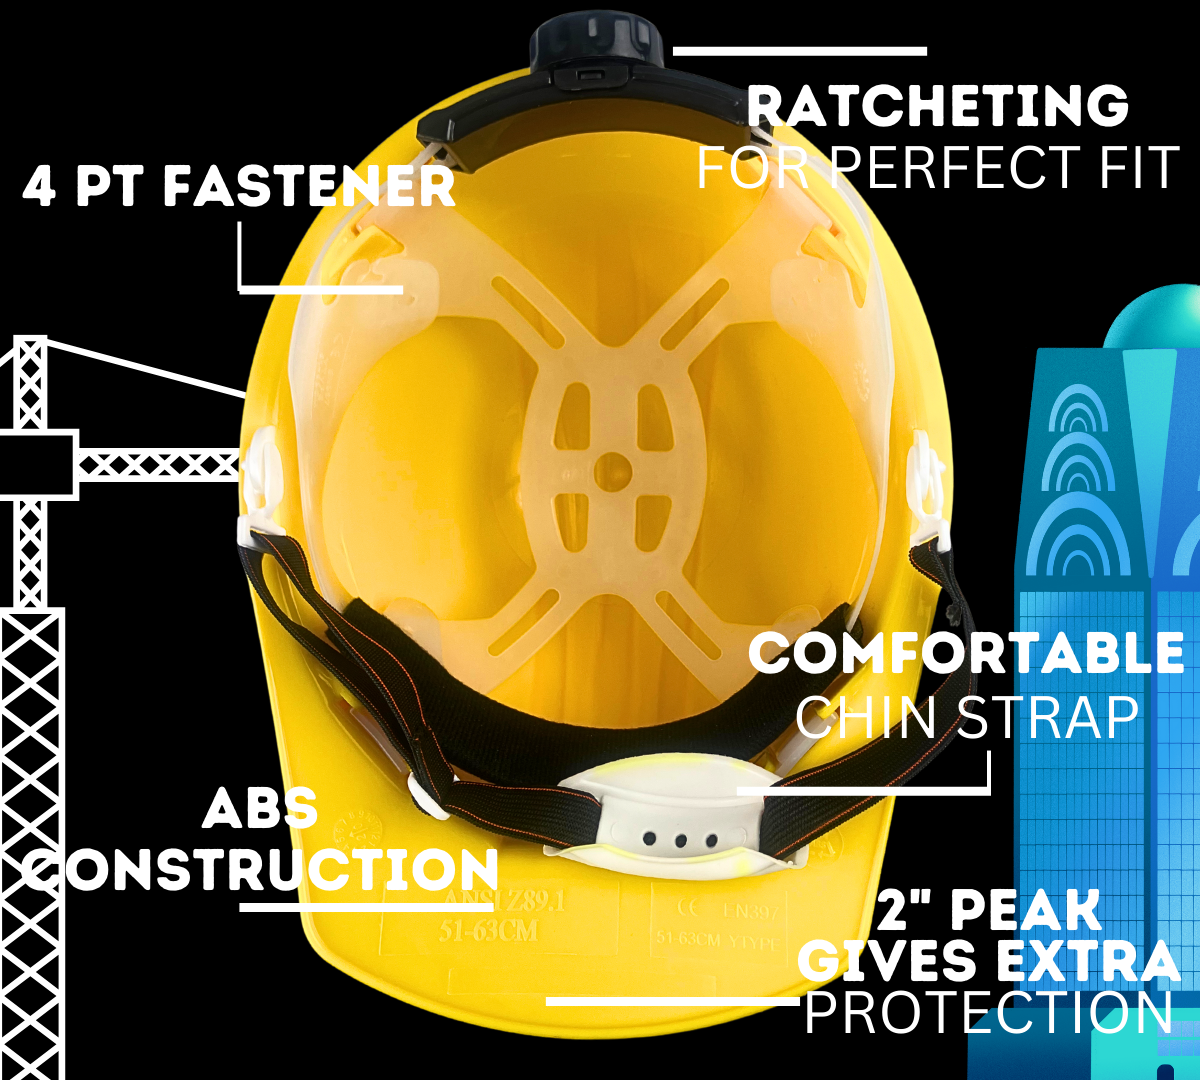 OSHA Approved ABS Adult Size Yellow Safety Hard Hat With Built-In Adjustable Liner  - SF-97704